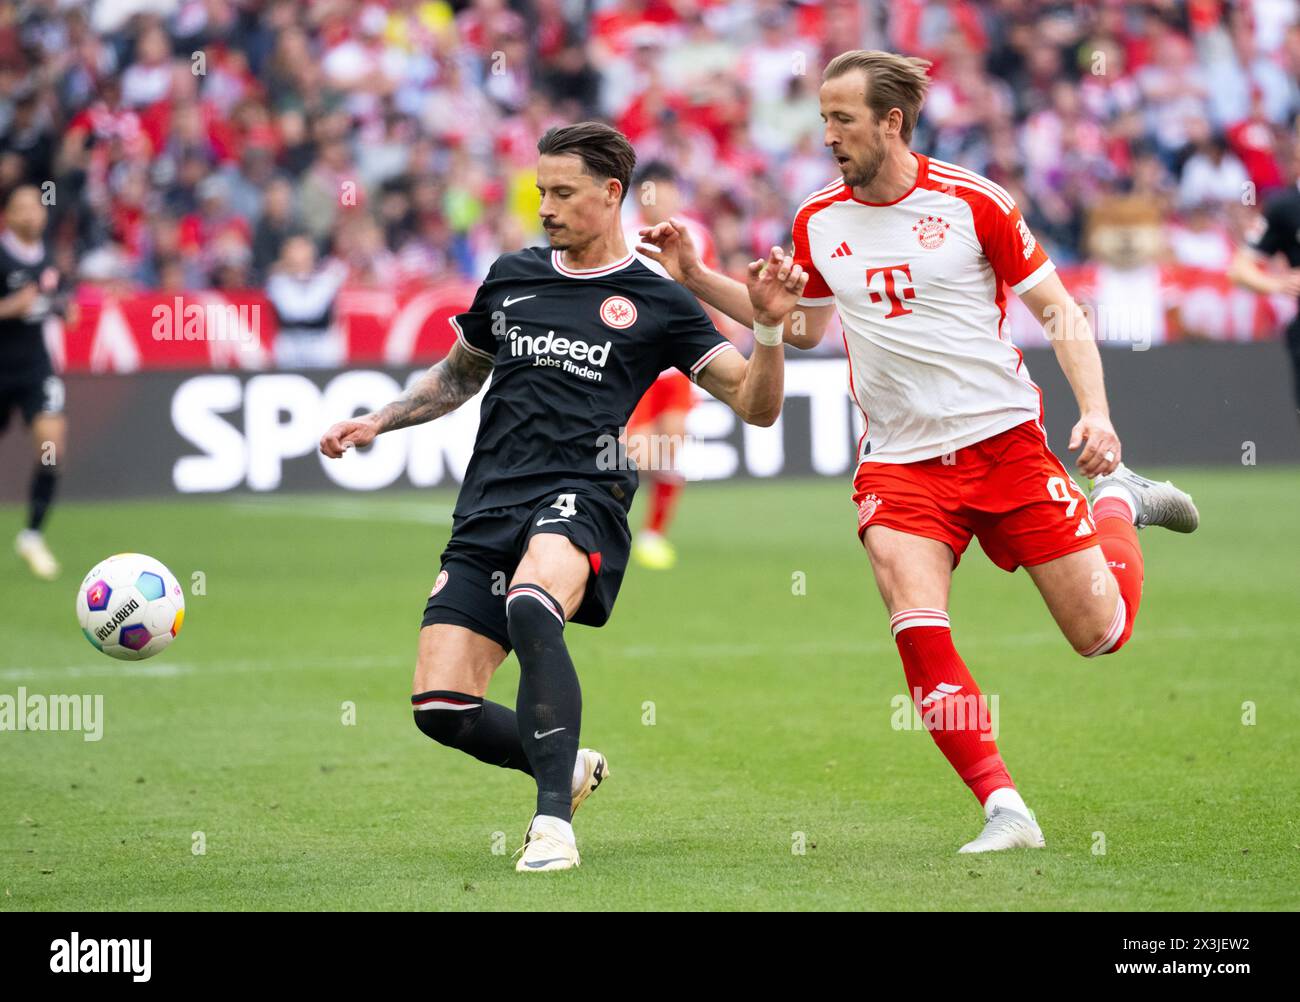 Munich, Germany. 27th Apr, 2024. Soccer: Bundesliga, Bayern Munich - Eintracht Frankfurt, matchday 31 at the Allianz Arena. Harry Kane (r) of Munich and Robin Koch of Frankfurt fight for the ball. Credit: Sven Hoppe/dpa - IMPORTANT NOTE: In accordance with the regulations of the DFL German Football League and the DFB German Football Association, it is prohibited to utilize or have utilized photographs taken in the stadium and/or of the match in the form of sequential images and/or video-like photo series./dpa/Alamy Live News Stock Photo